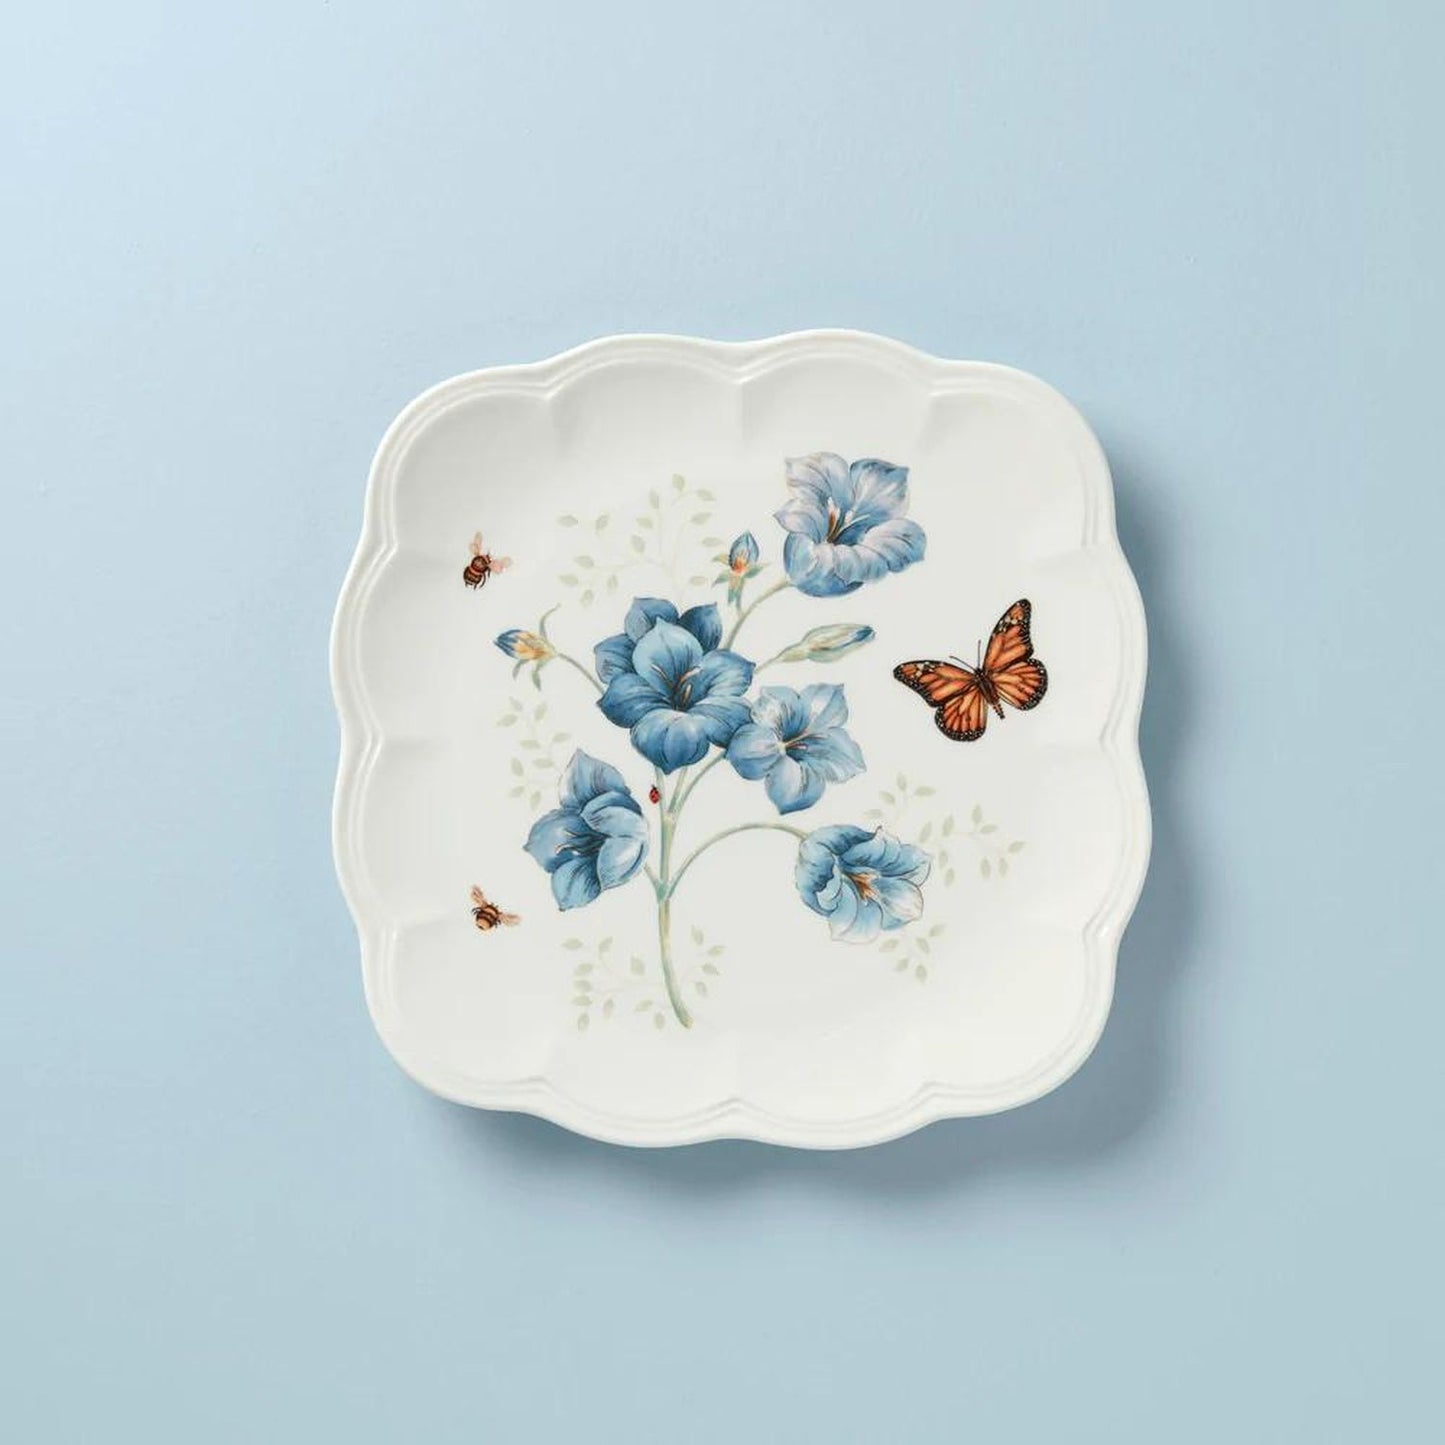 Lenox Butterfly Meadow Square Dinner Plate.